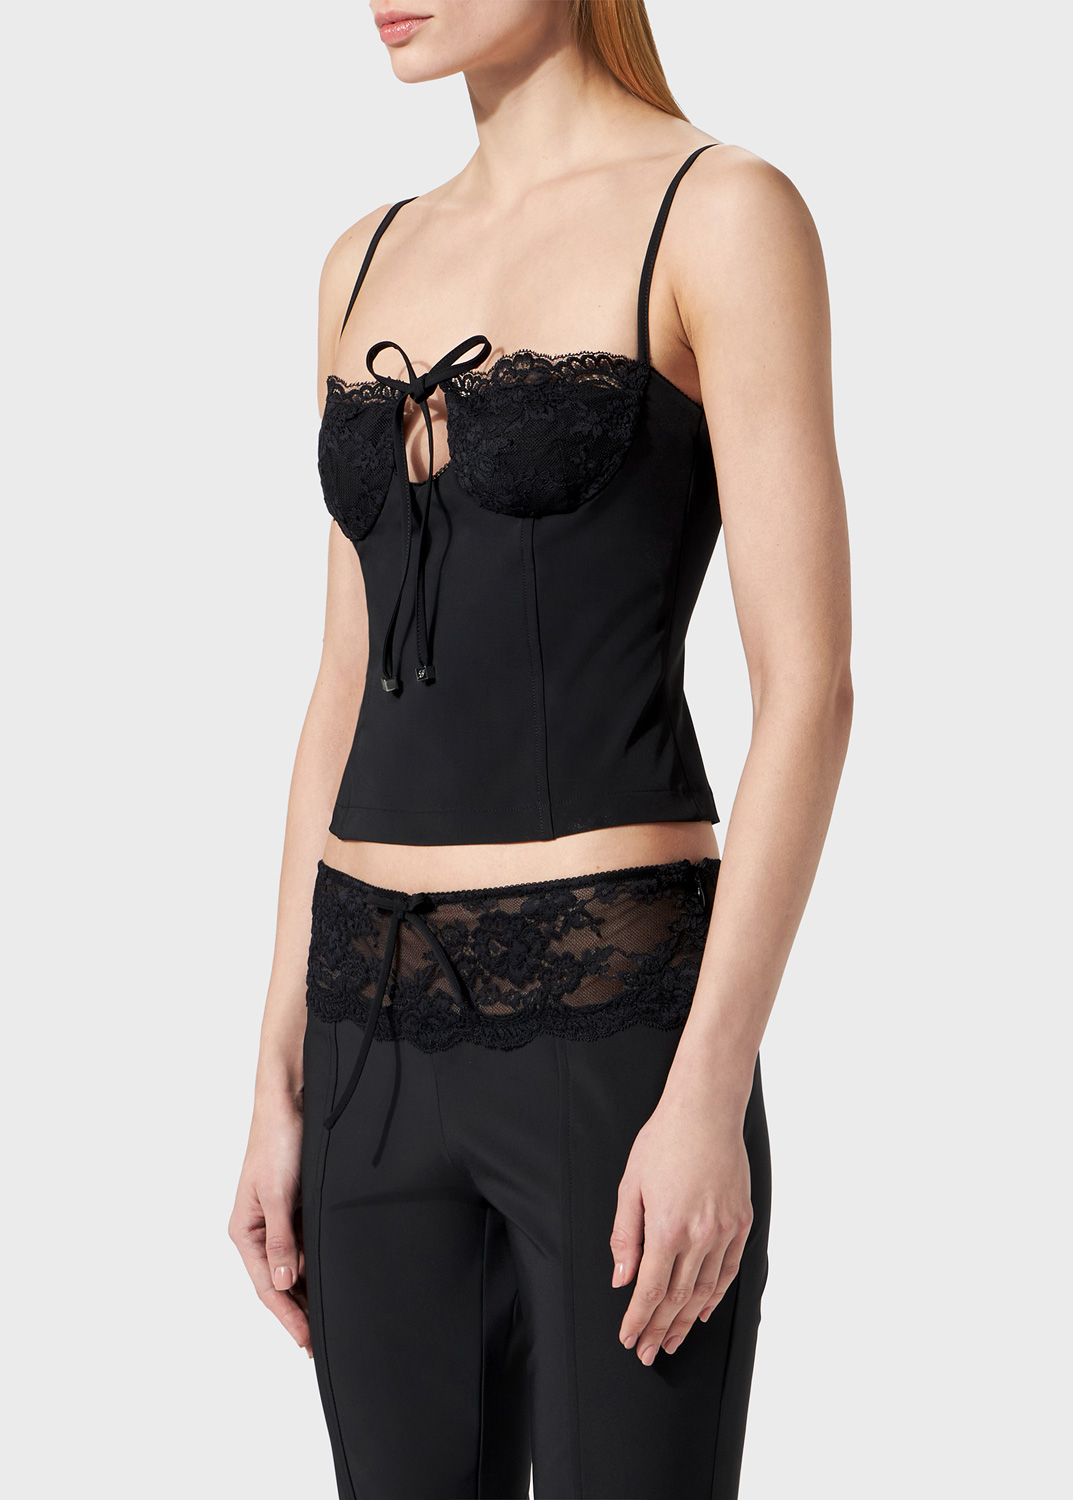 Top with lace insert | Blumarine